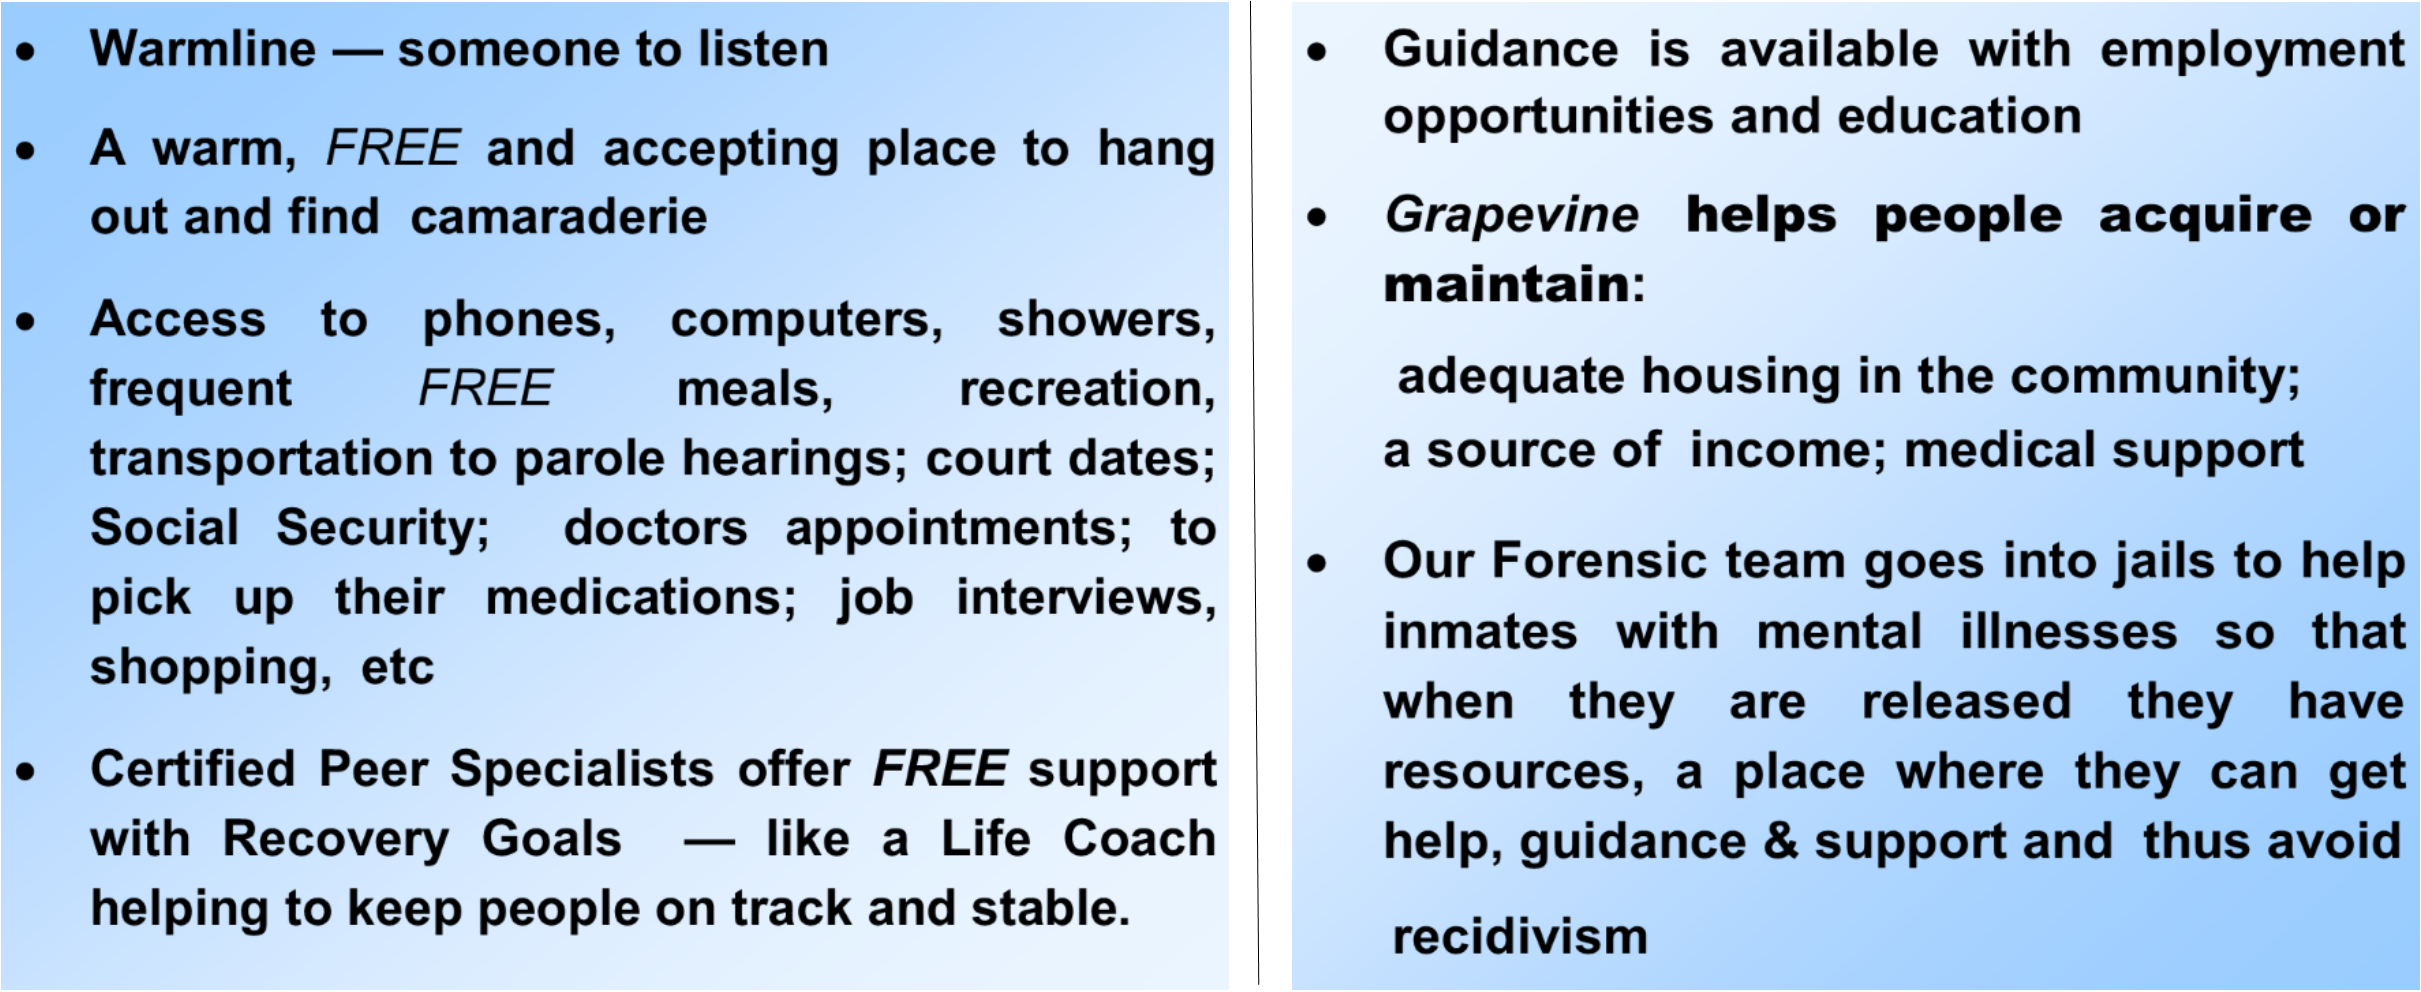 Services and facilities offered by Grapevine Center